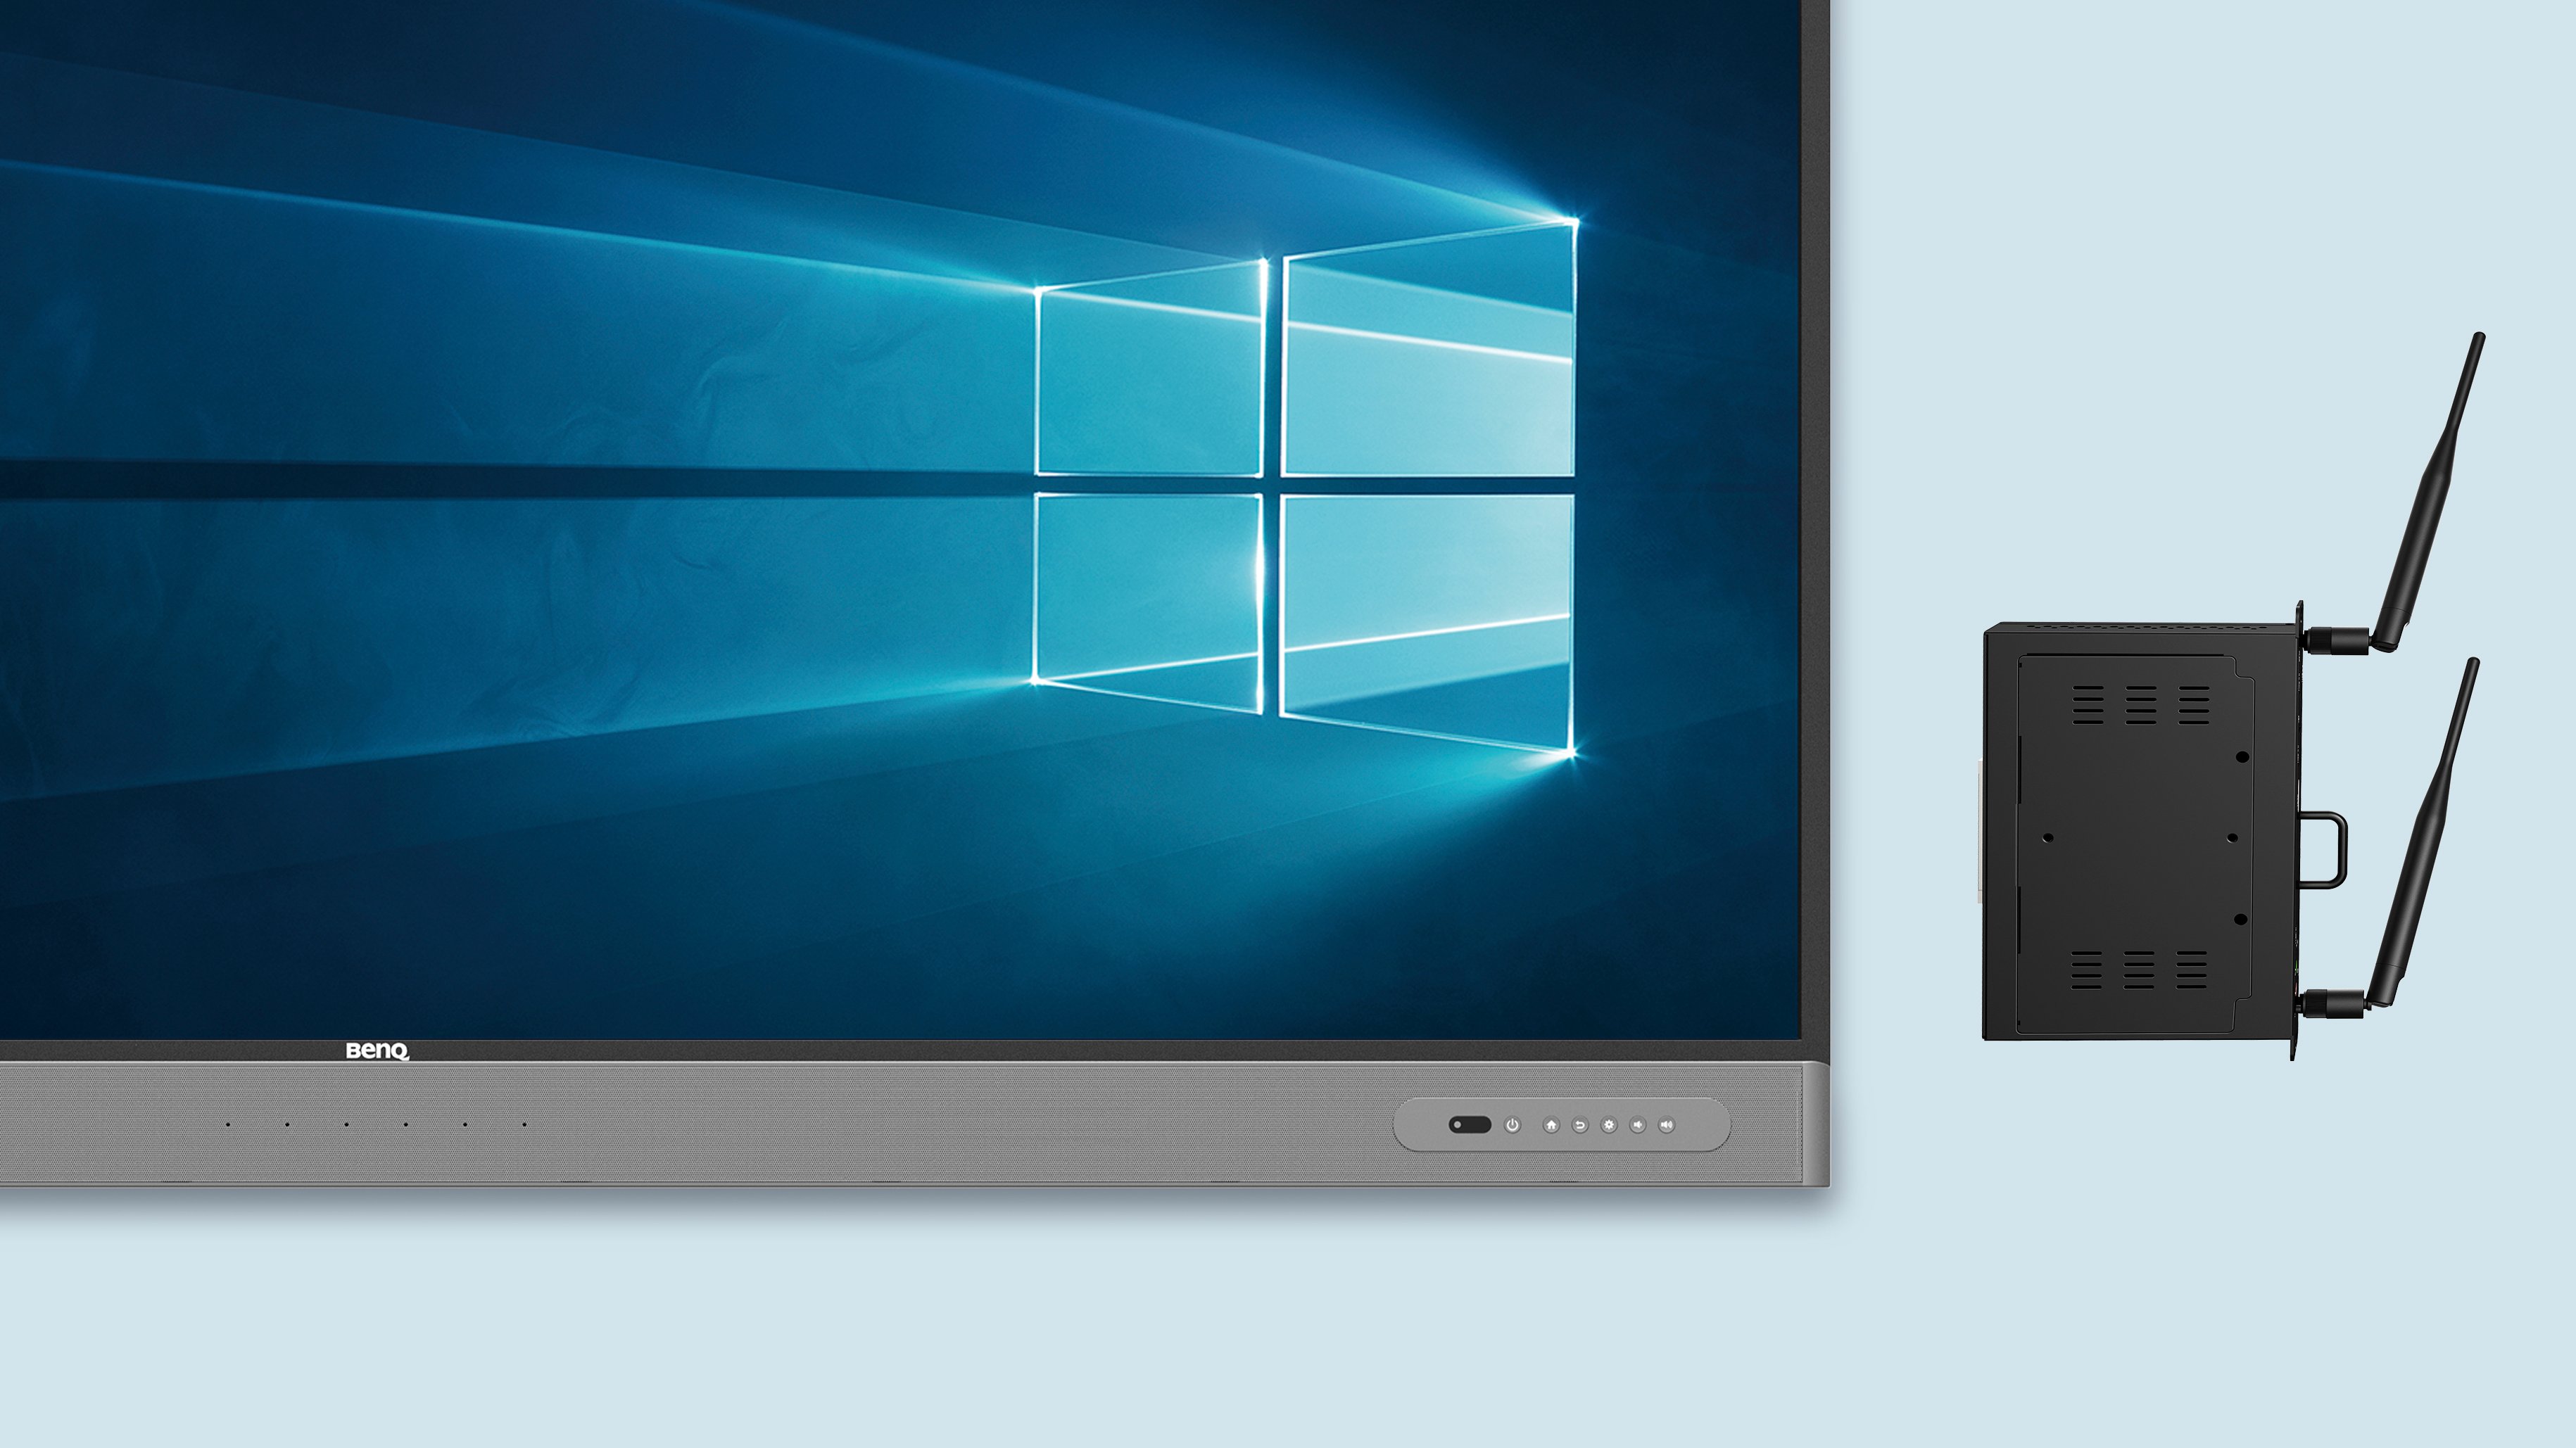 Run Windows with  slot-in PC to BenQ interactive display